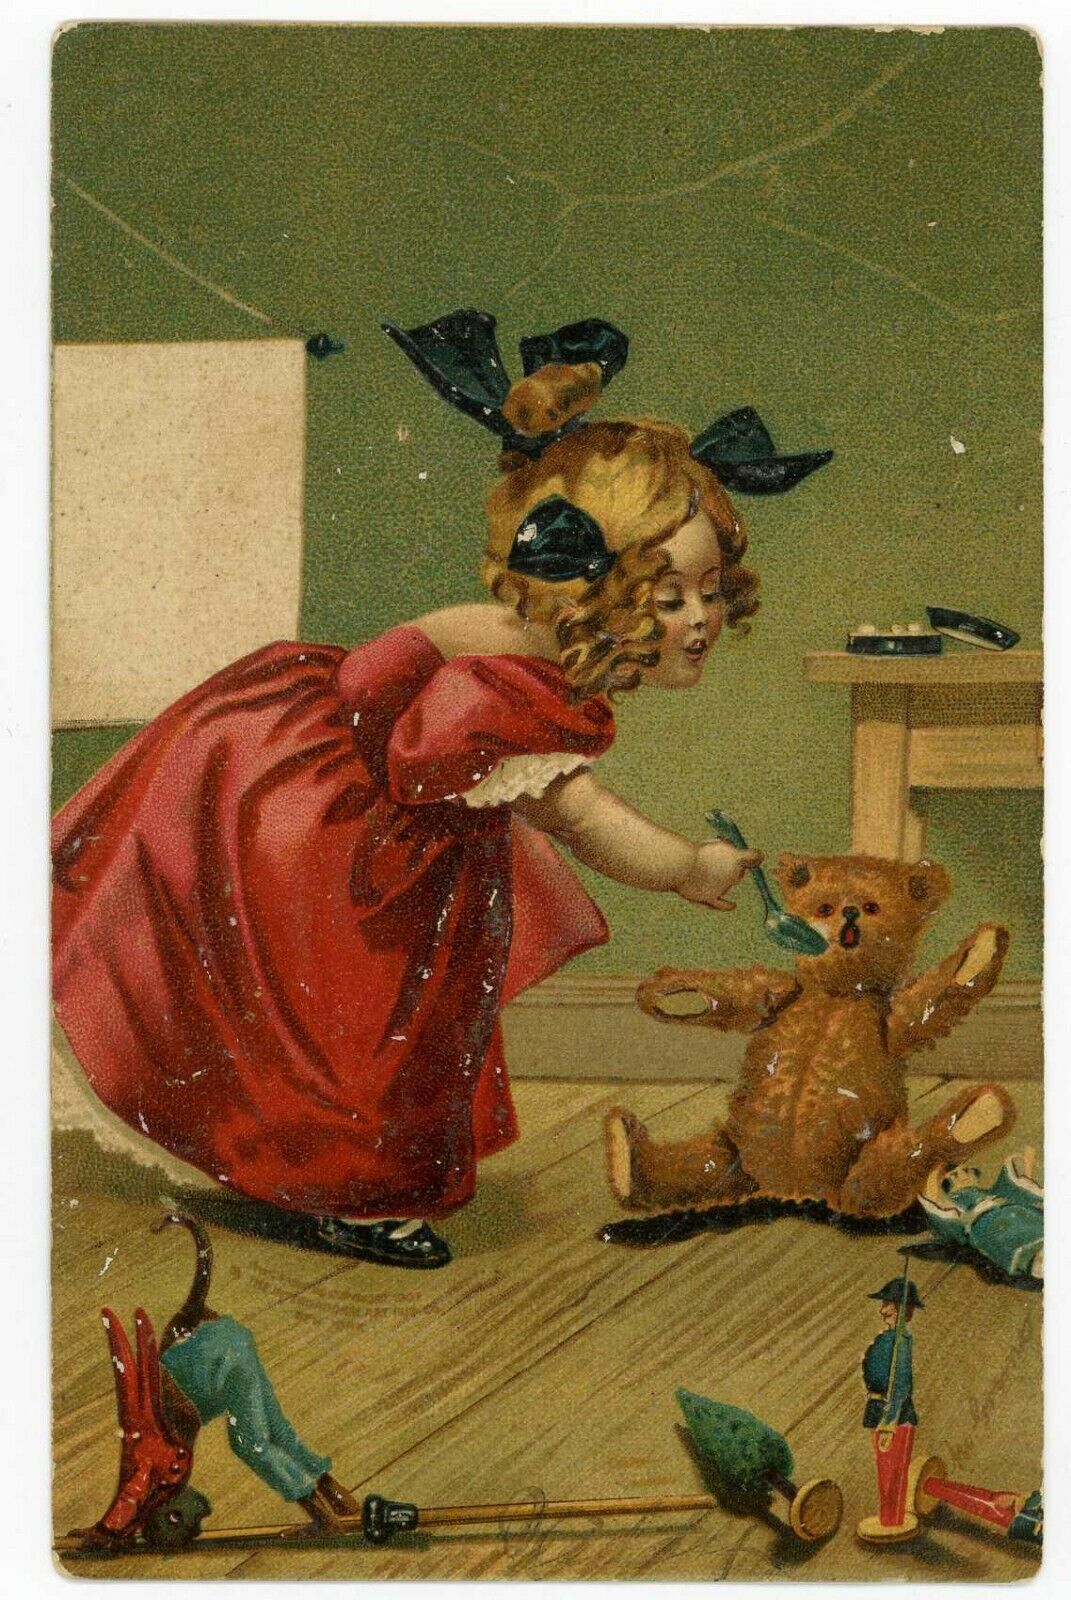 Vintage Postcard MOLLY & THE BEARS Molly Feeding The Bear Series by M. Greiner